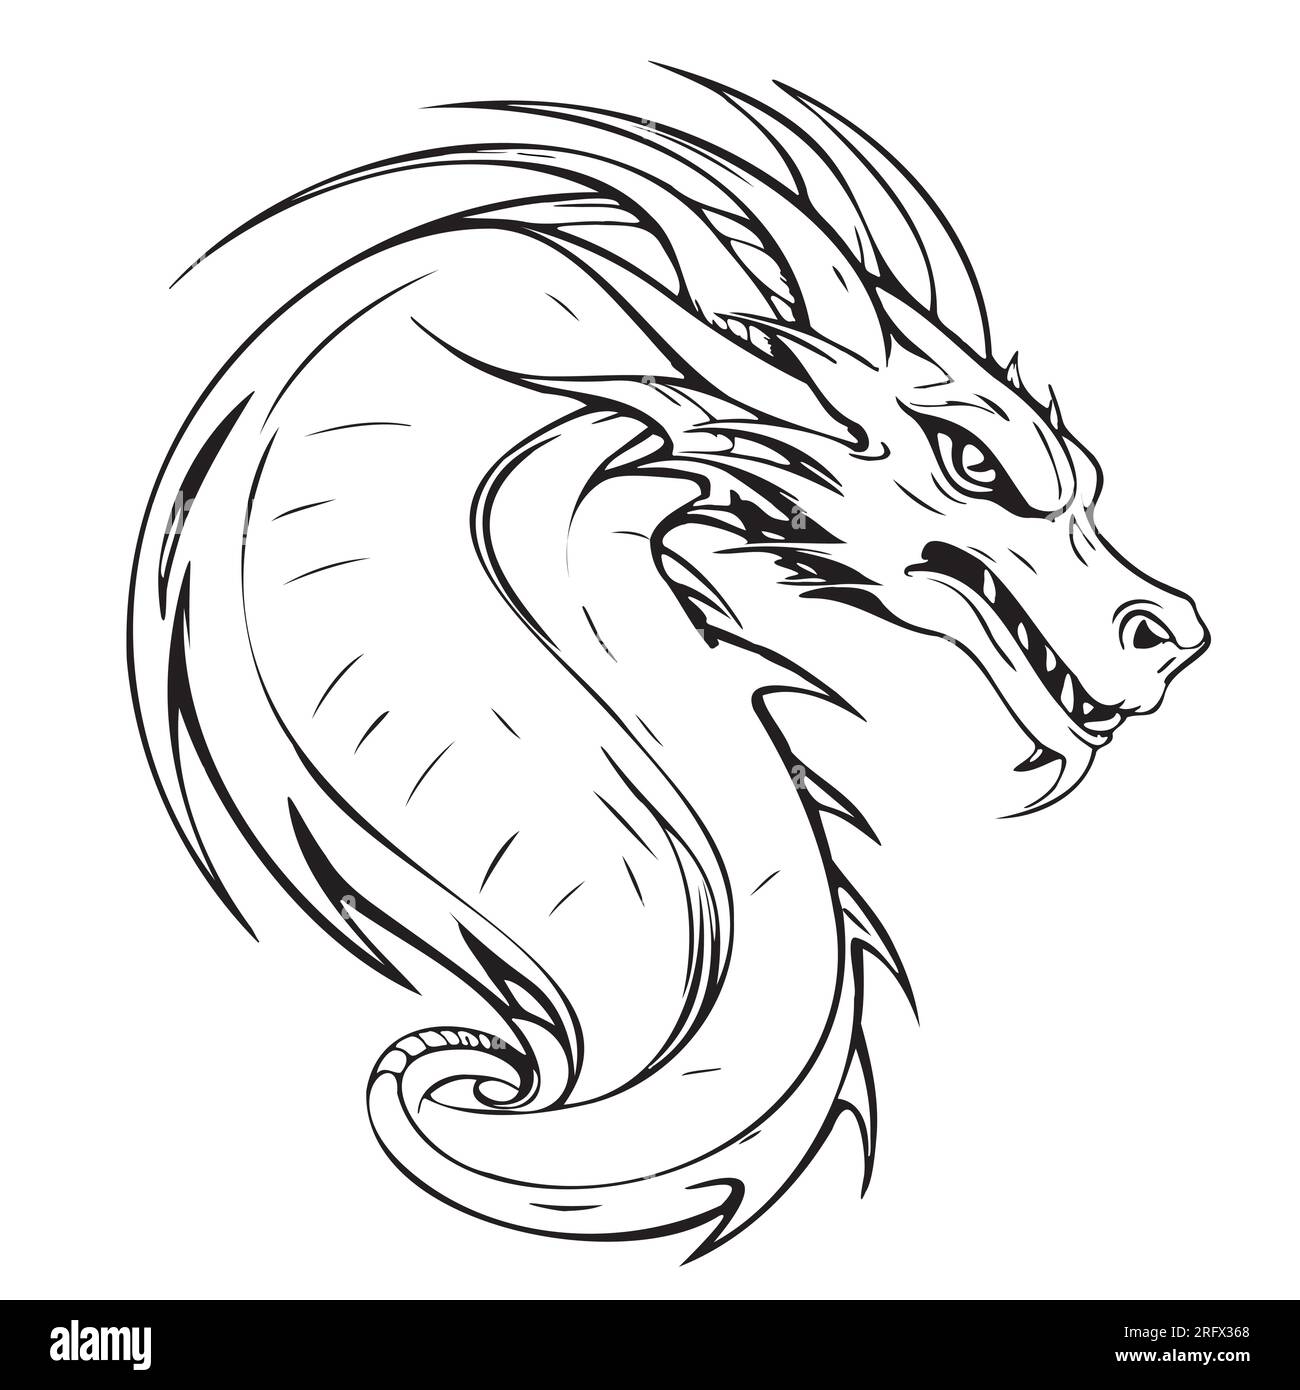 Dragon mystical sketch logo hand drawn in doodle style illustration Stock Vector